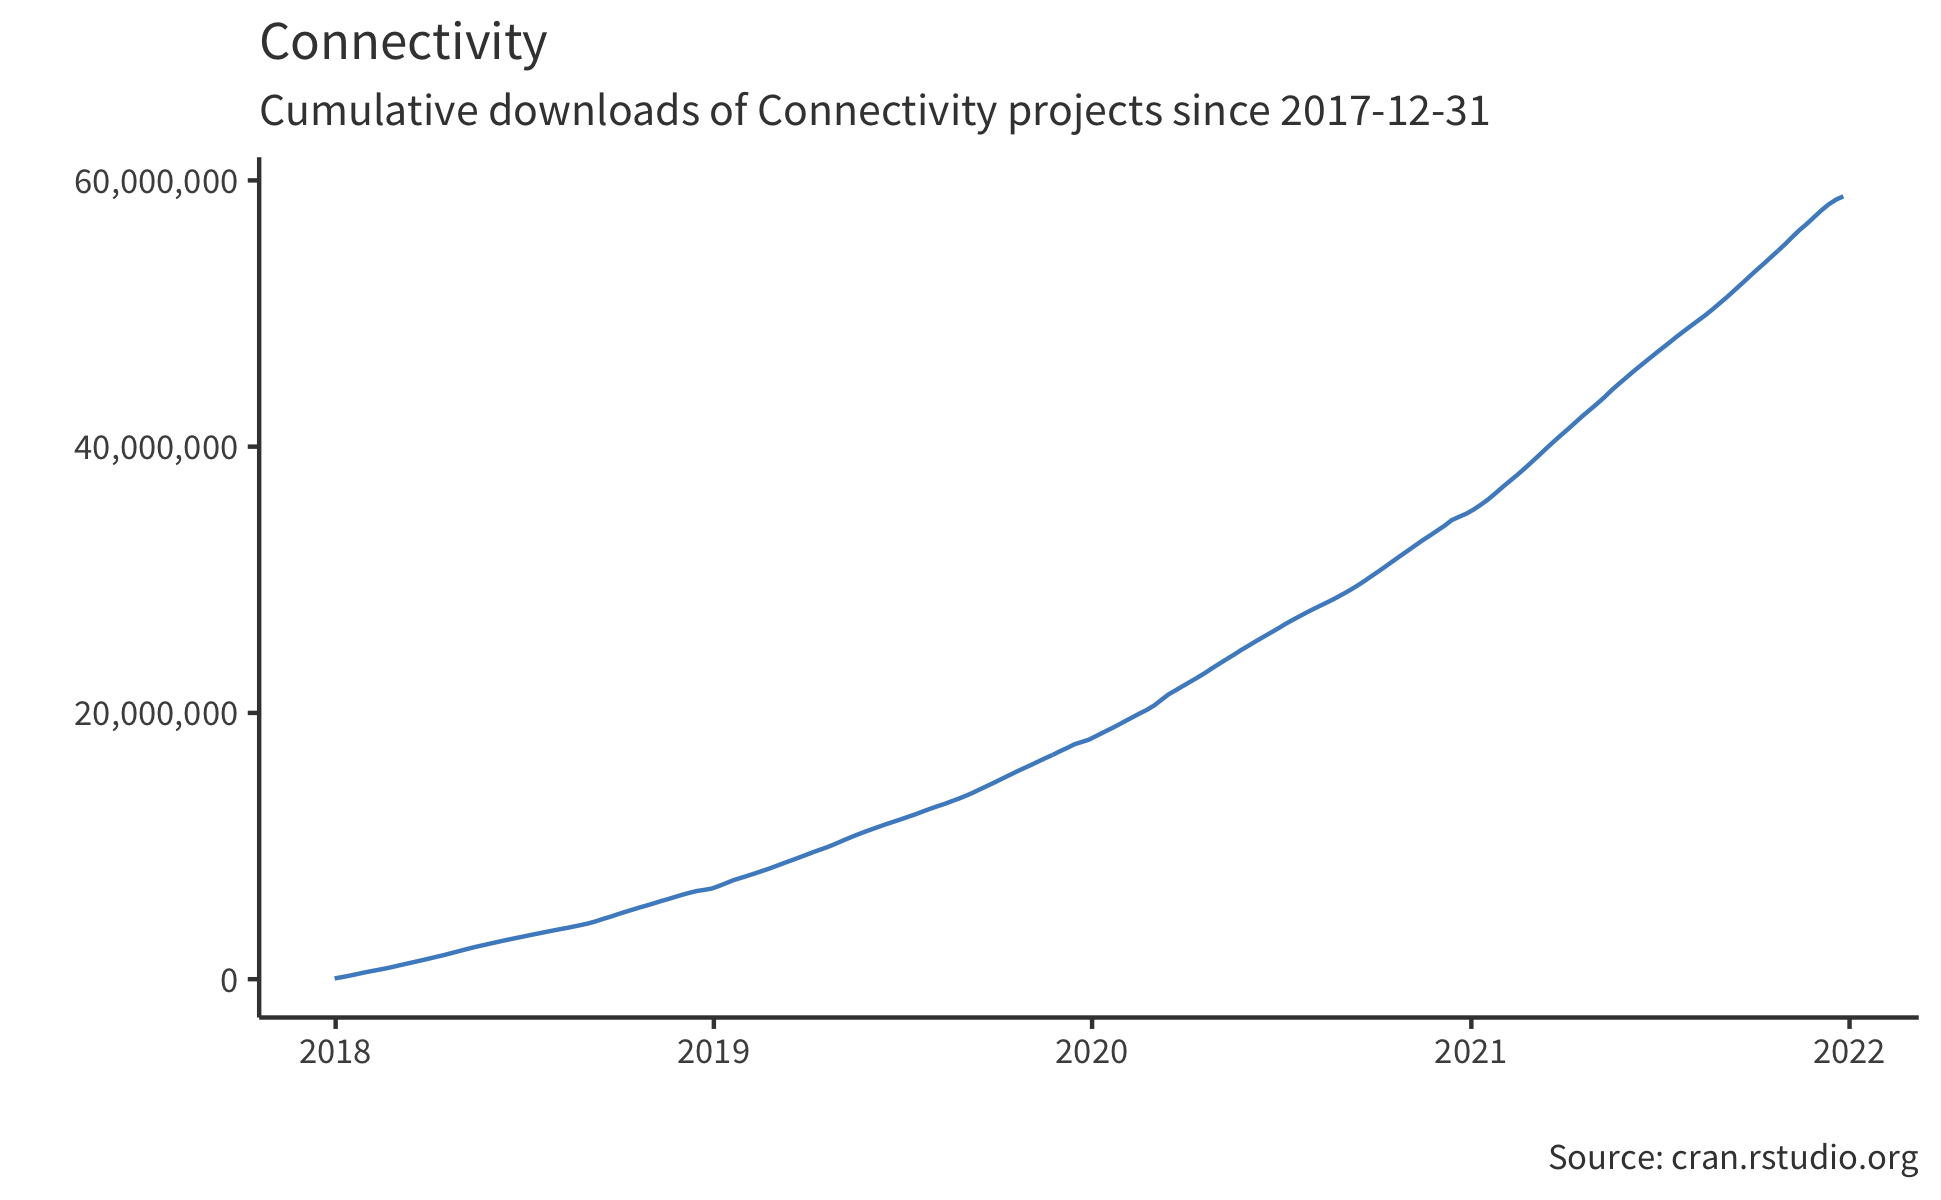 Connectivity Packages